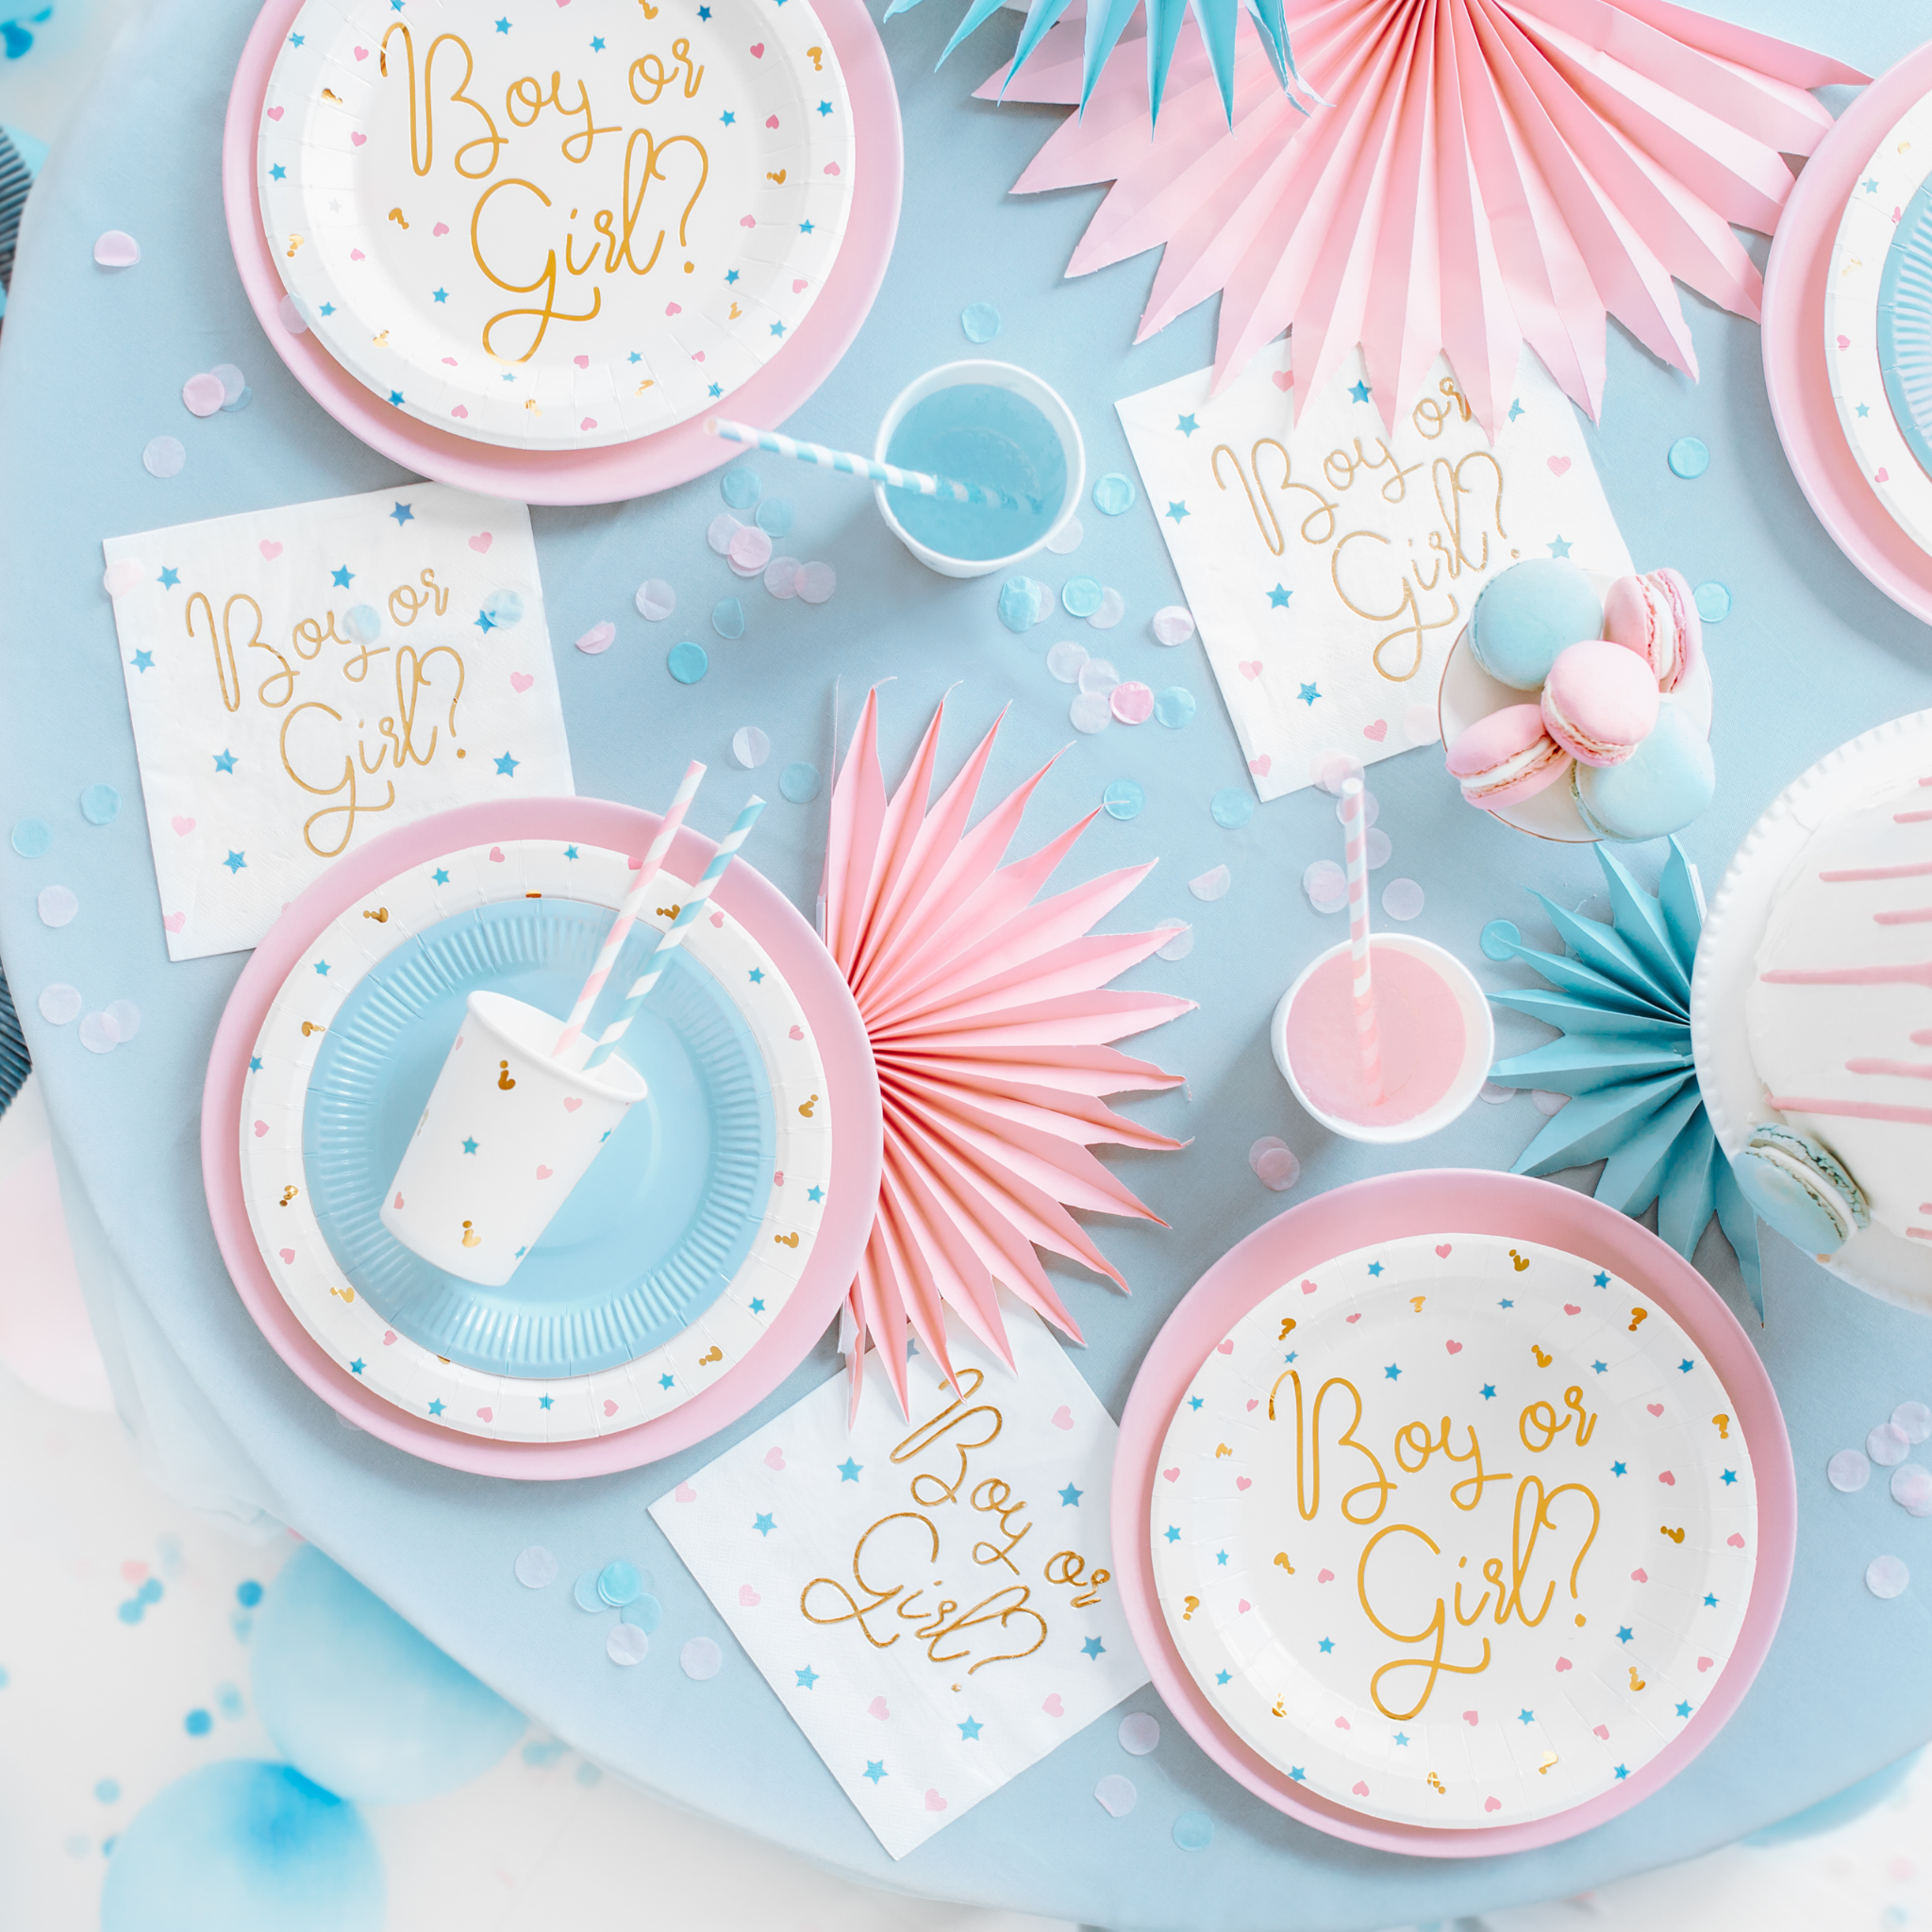 Boy or Girl Themed Paper Plates Set